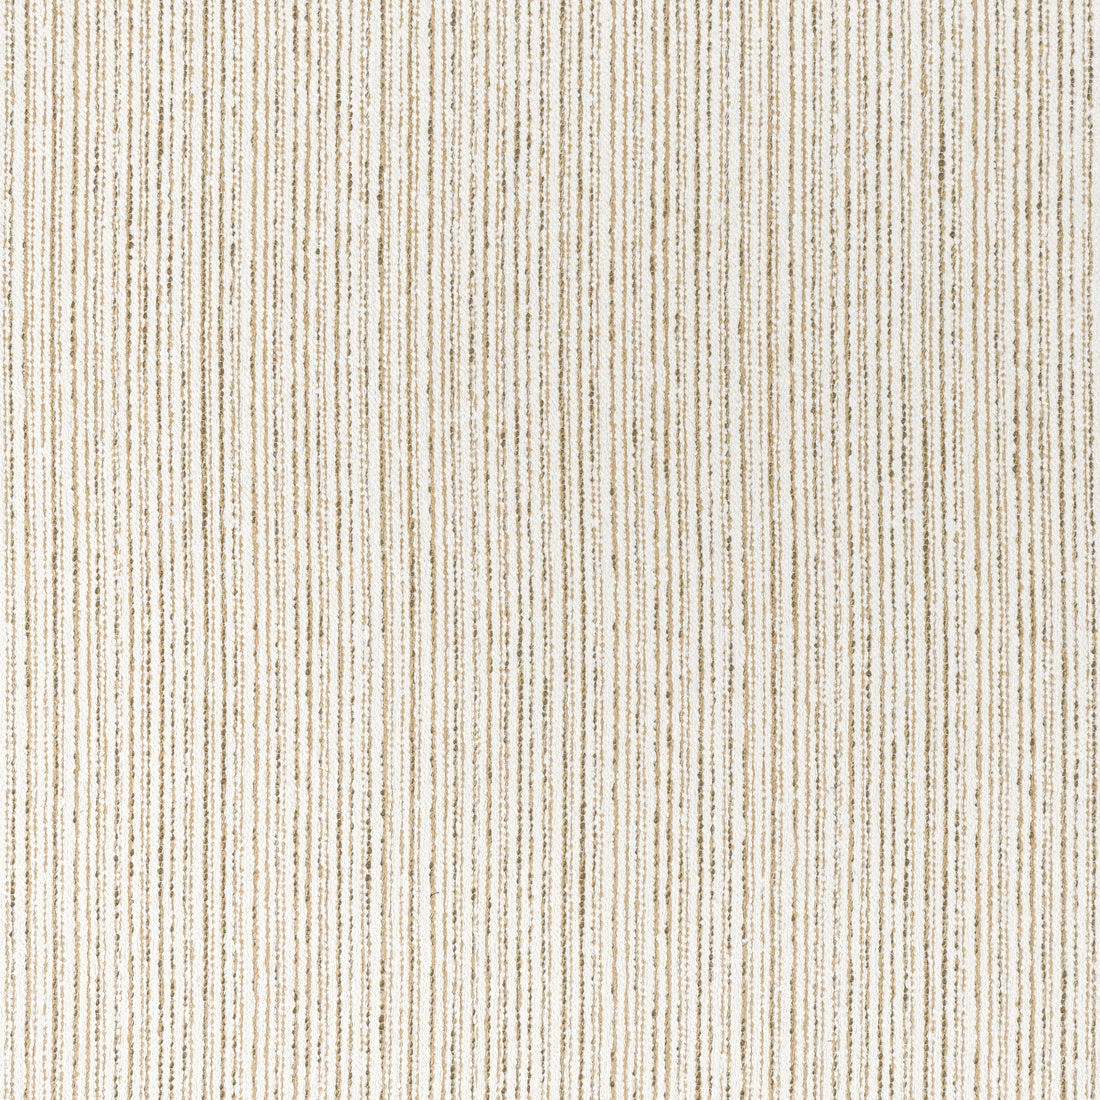 Zia Stripe fabric in caramel color - pattern number W8803 - by Thibaut in the Haven collection